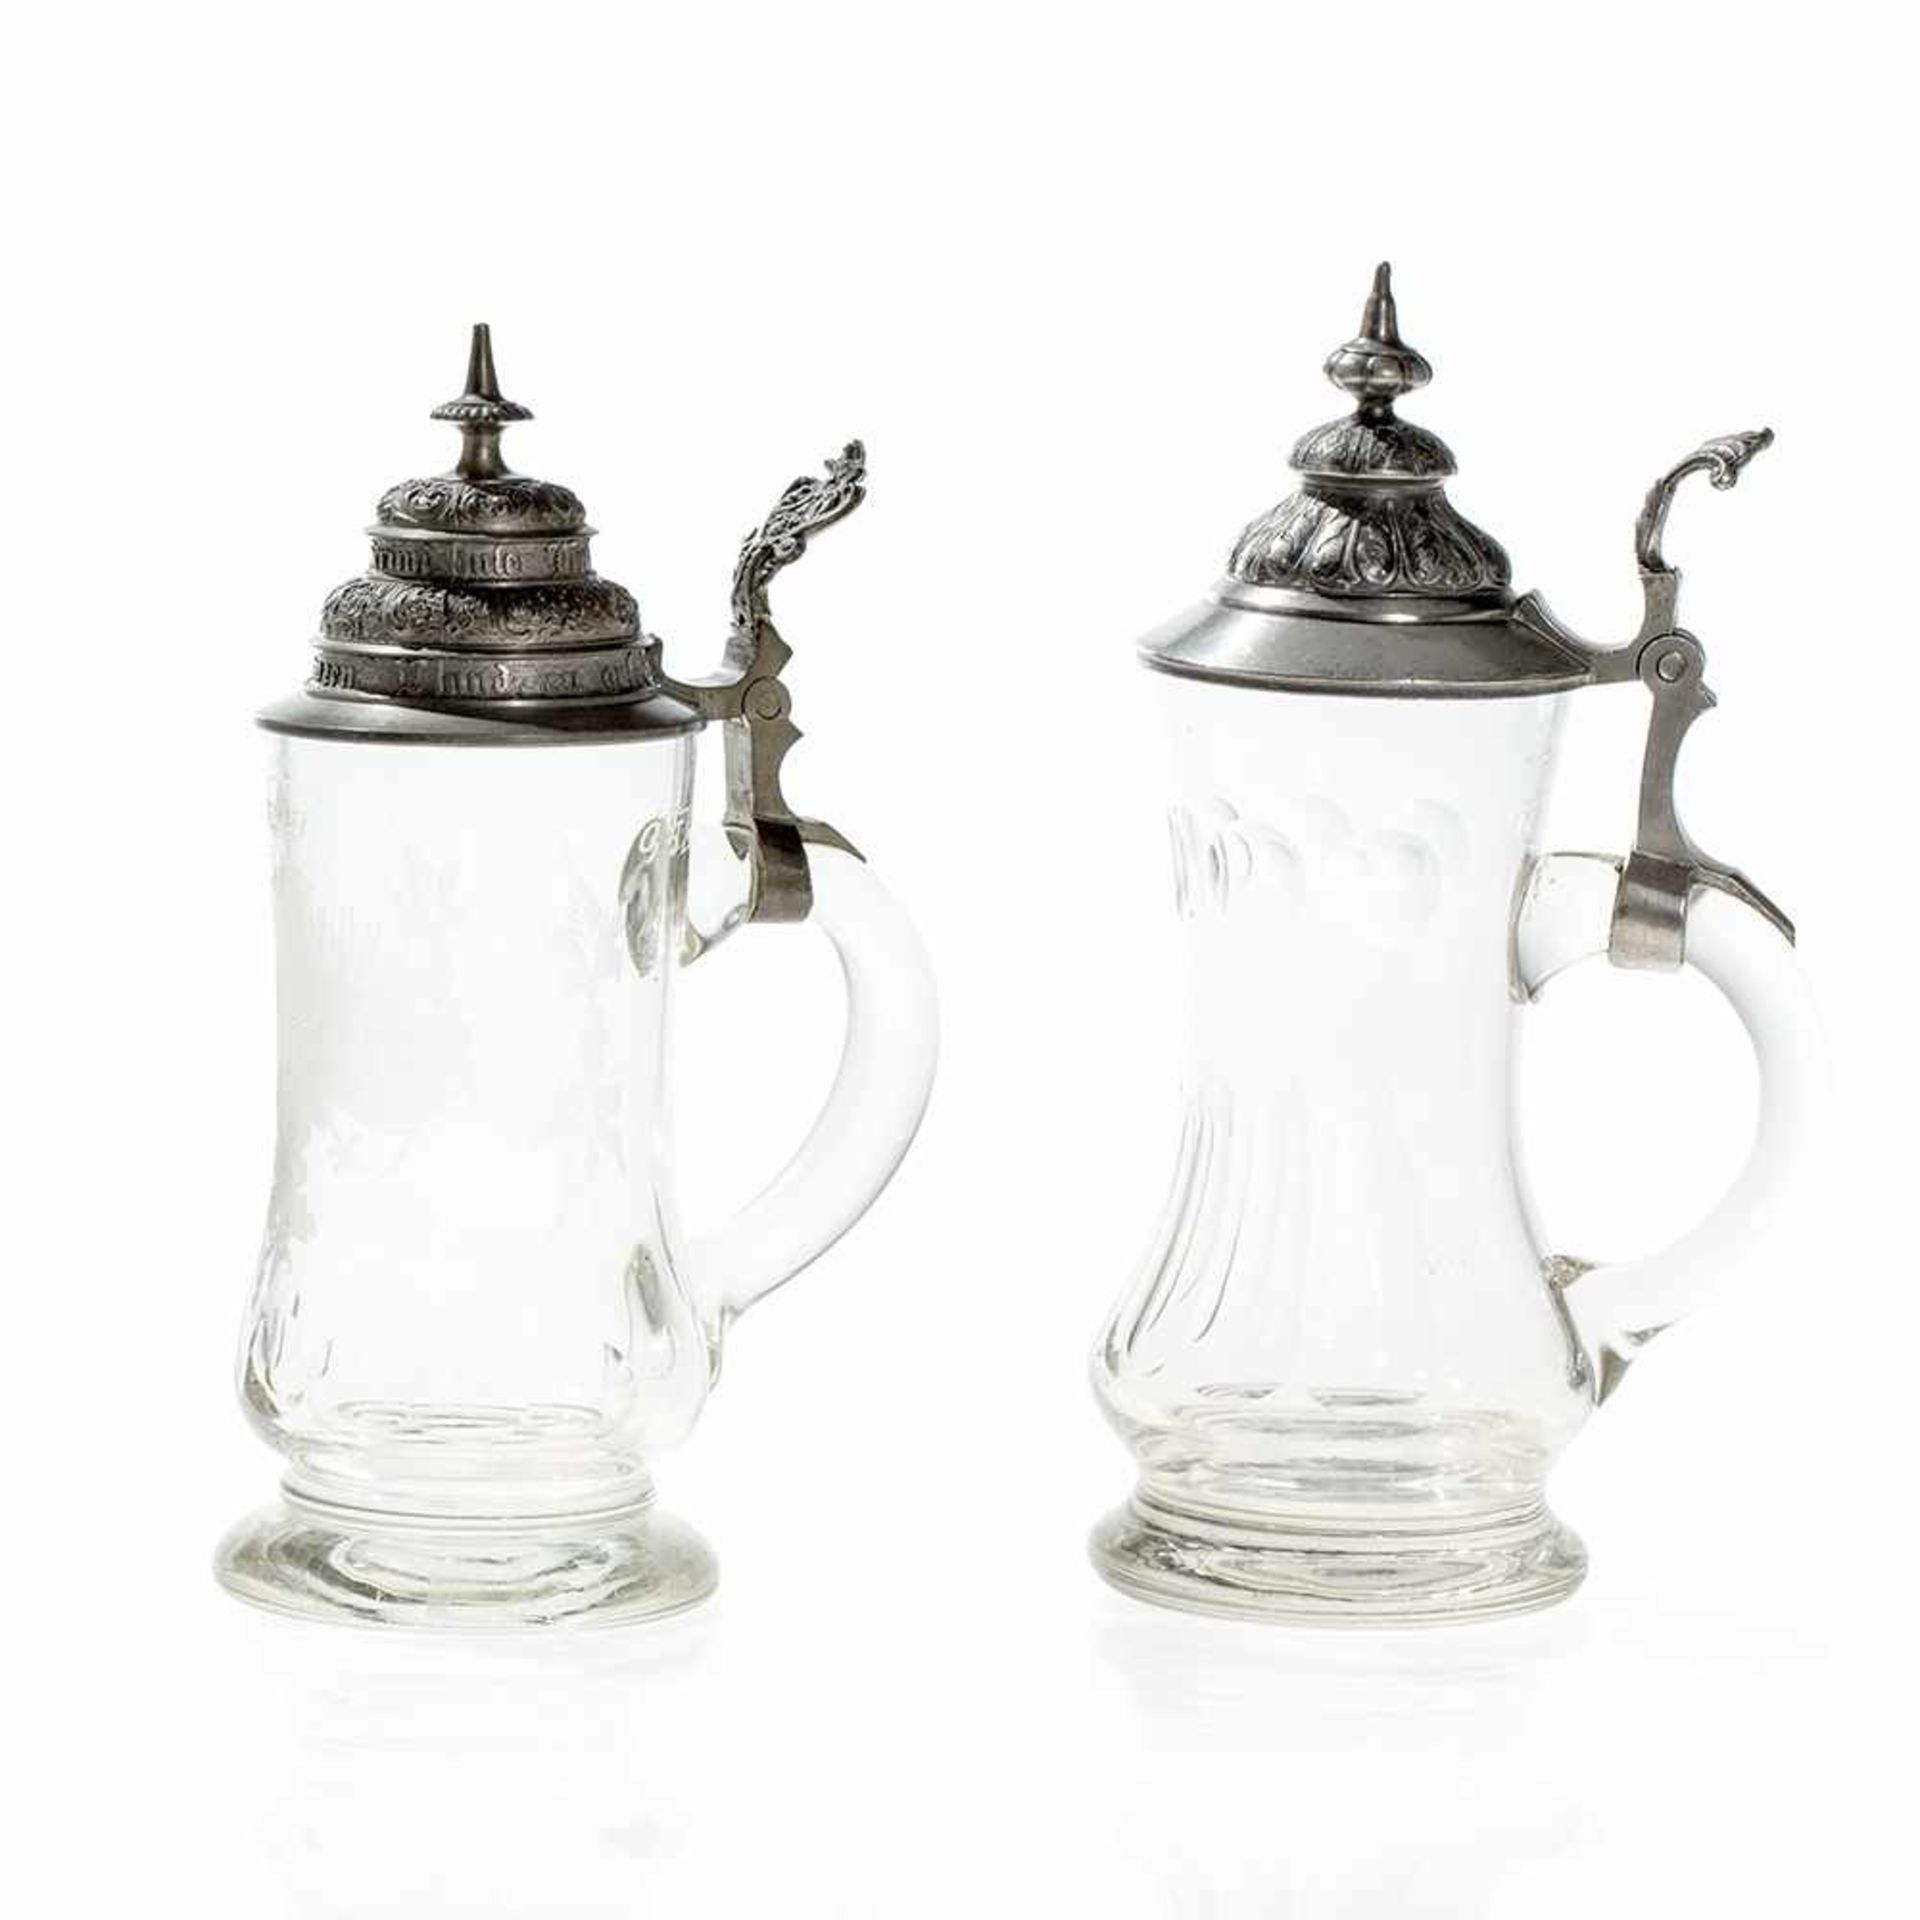 Two Lidded Beer Steins with Pewter Lids, Germany, around 1900 Cut glass with pewter elements - Bild 9 aus 10